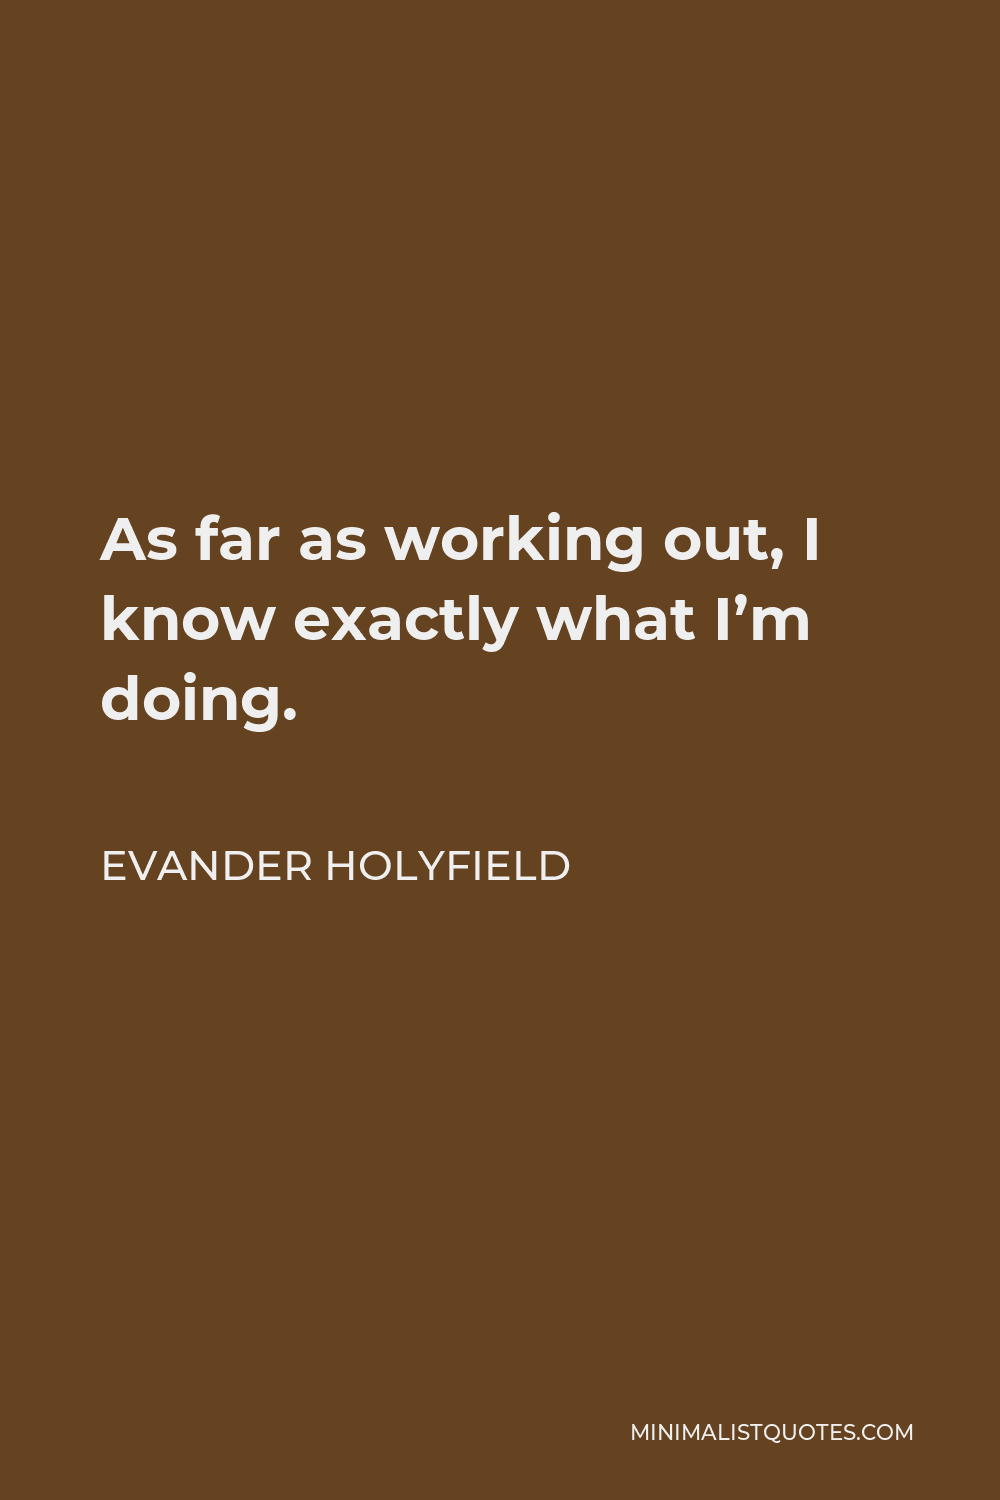 Evander Holyfield Quote - As far as working out, I know exactly what I’m doing.